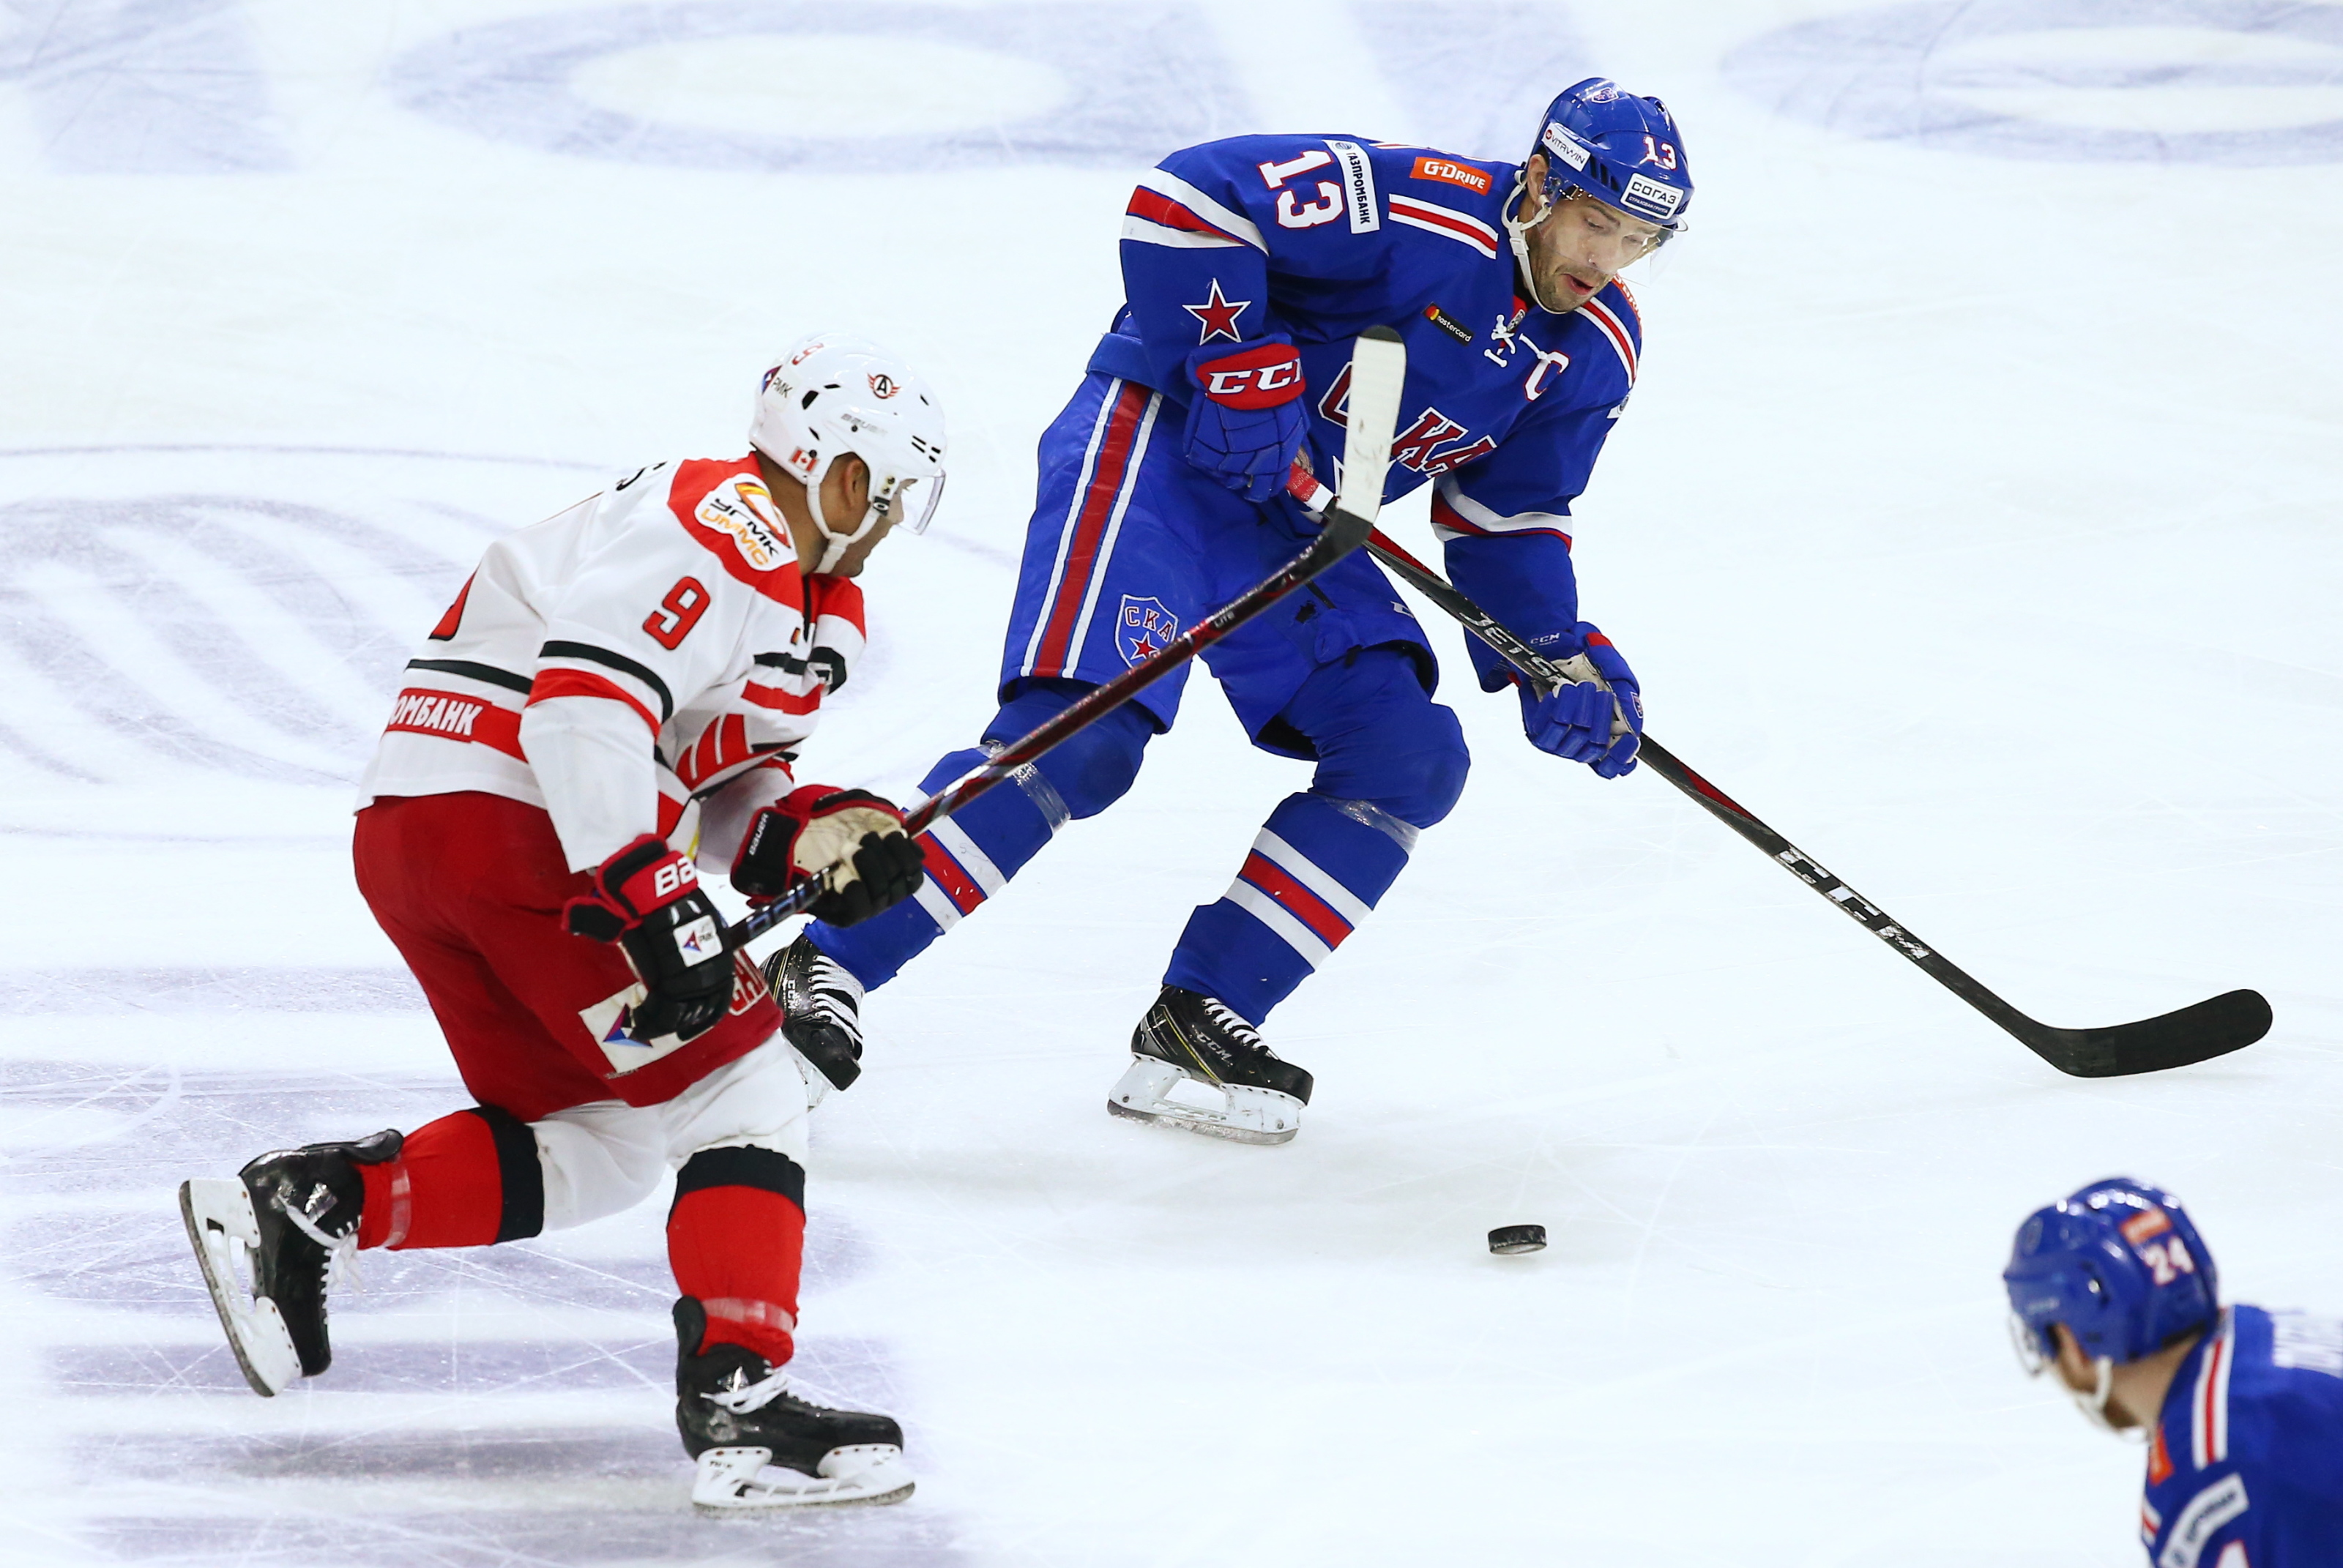 Pavel Datsyuk leaving Detroit Red Wings: 'I have to go back home